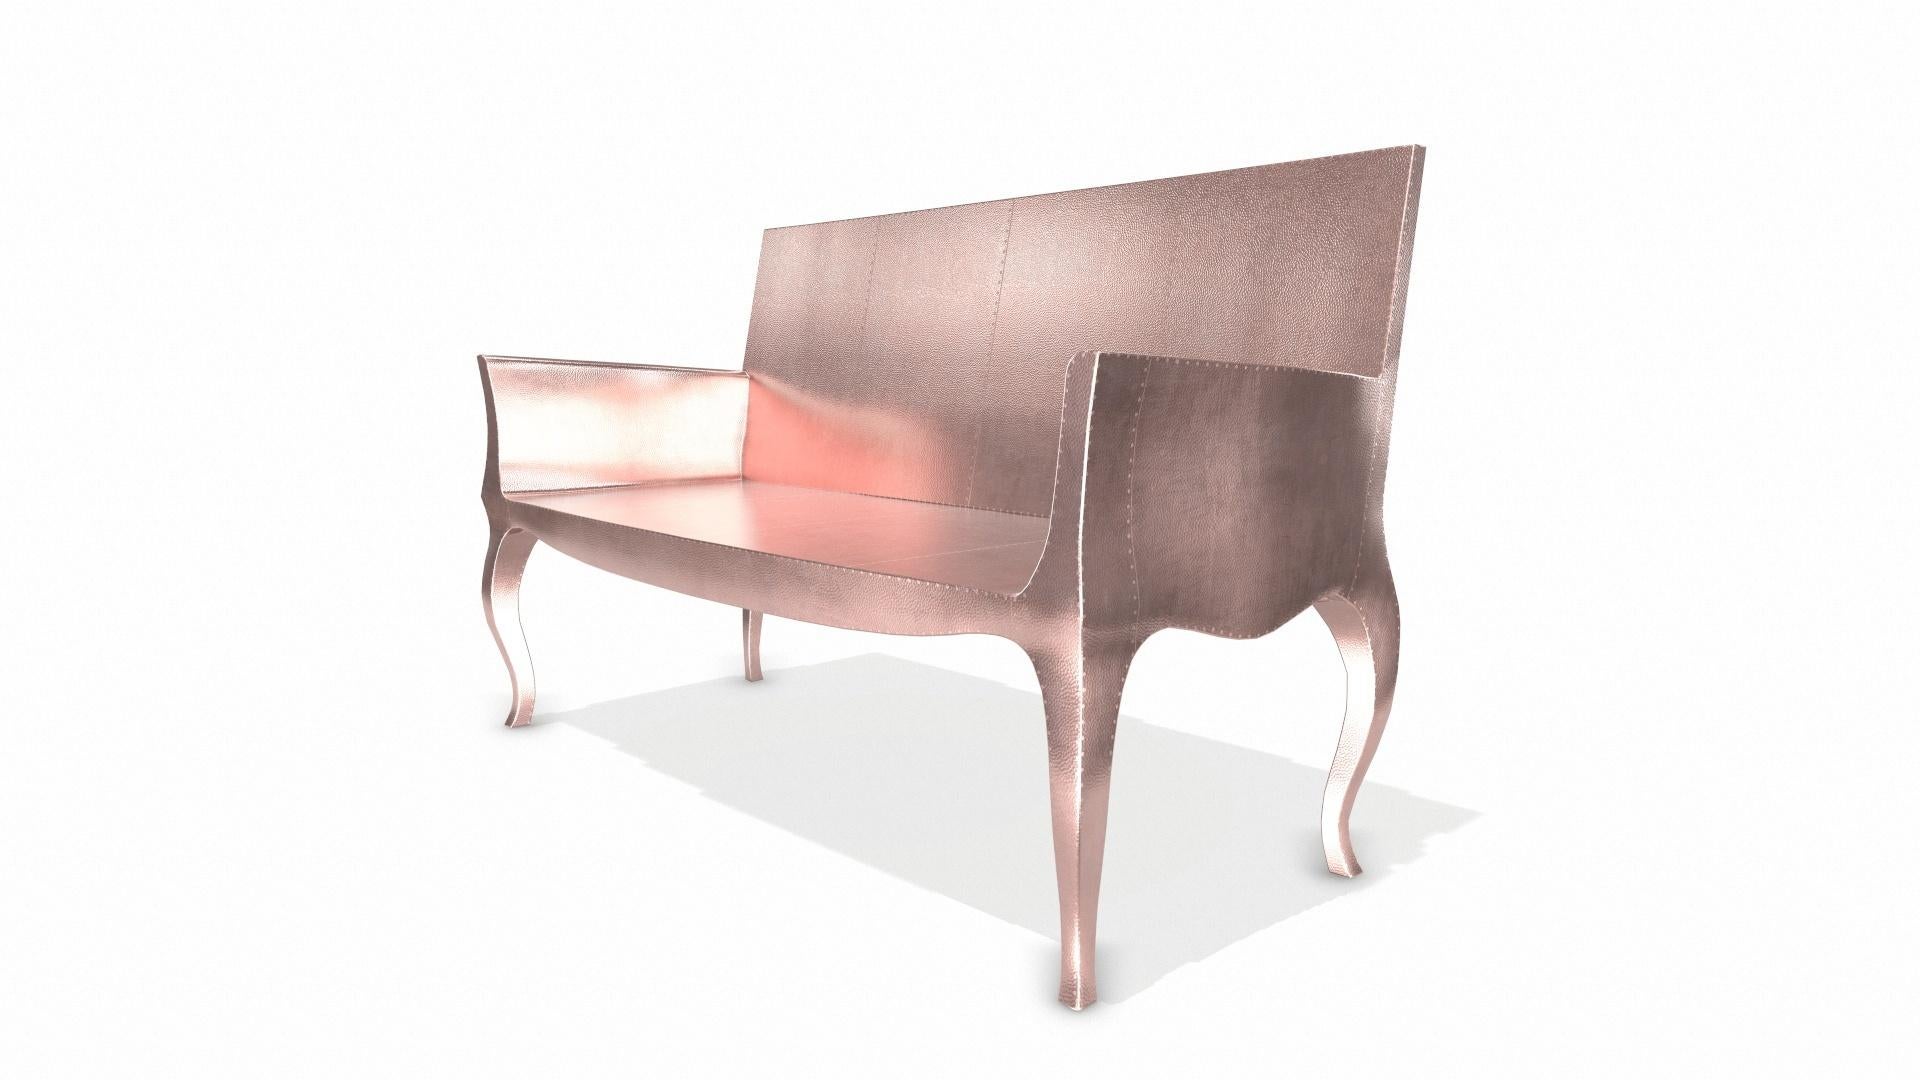 Woodwork Louise Settee Art Deco Chaise Longues  in Mid. Hammered Copper by Paul Mathieu For Sale